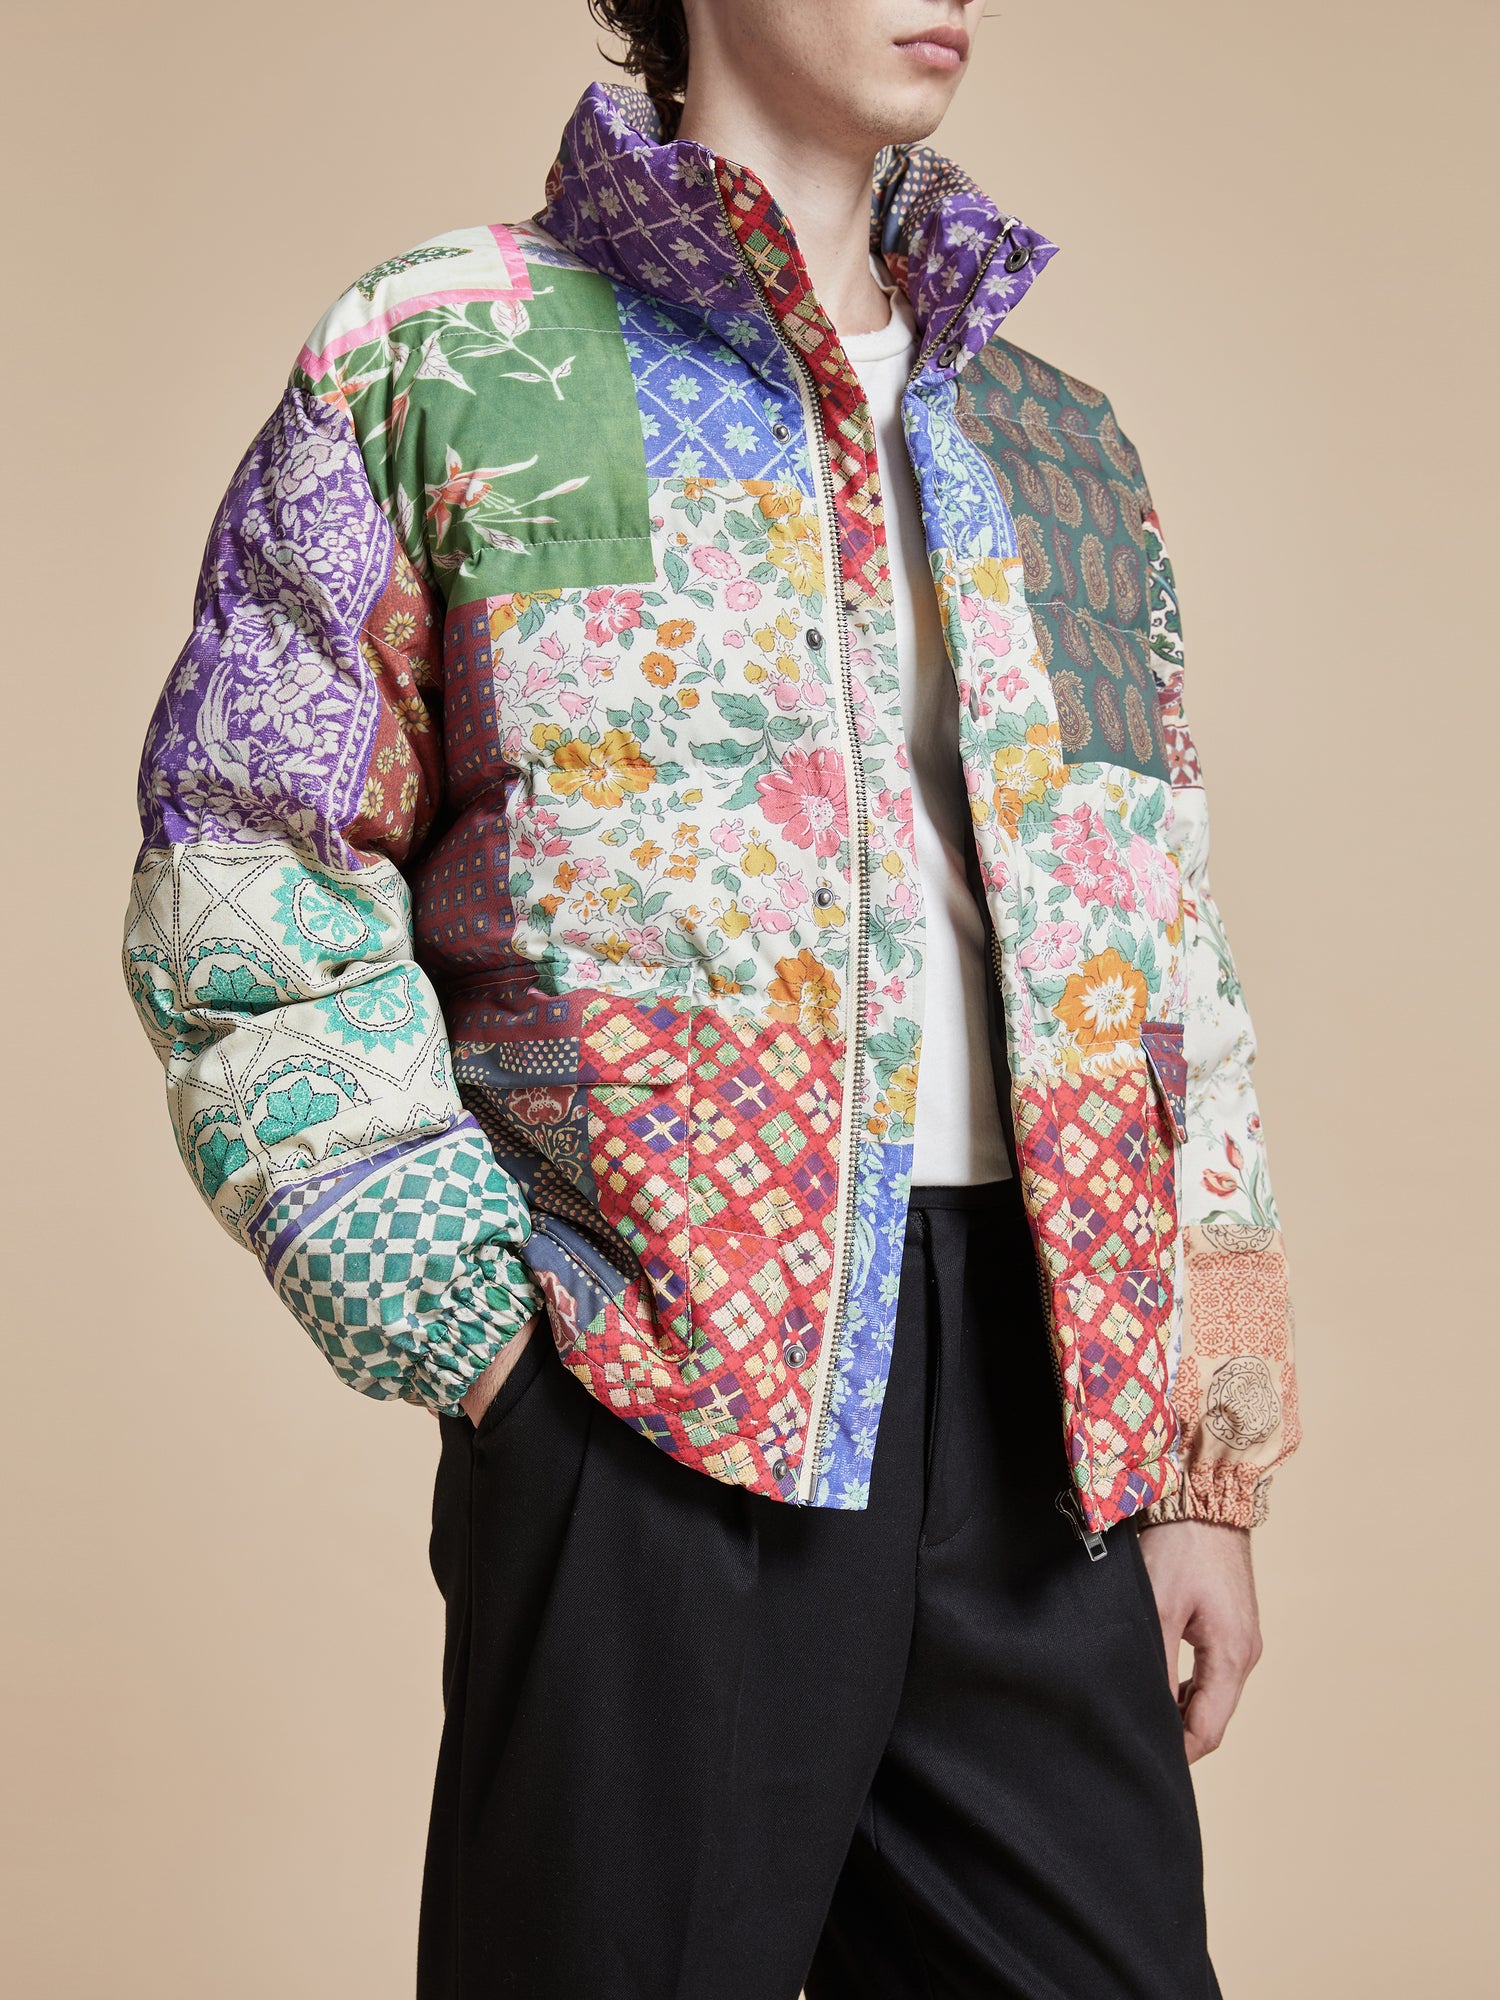 The model is wearing a pre-order Found Gardenia Tapestry Puffer Jacket with a patchwork pattern.